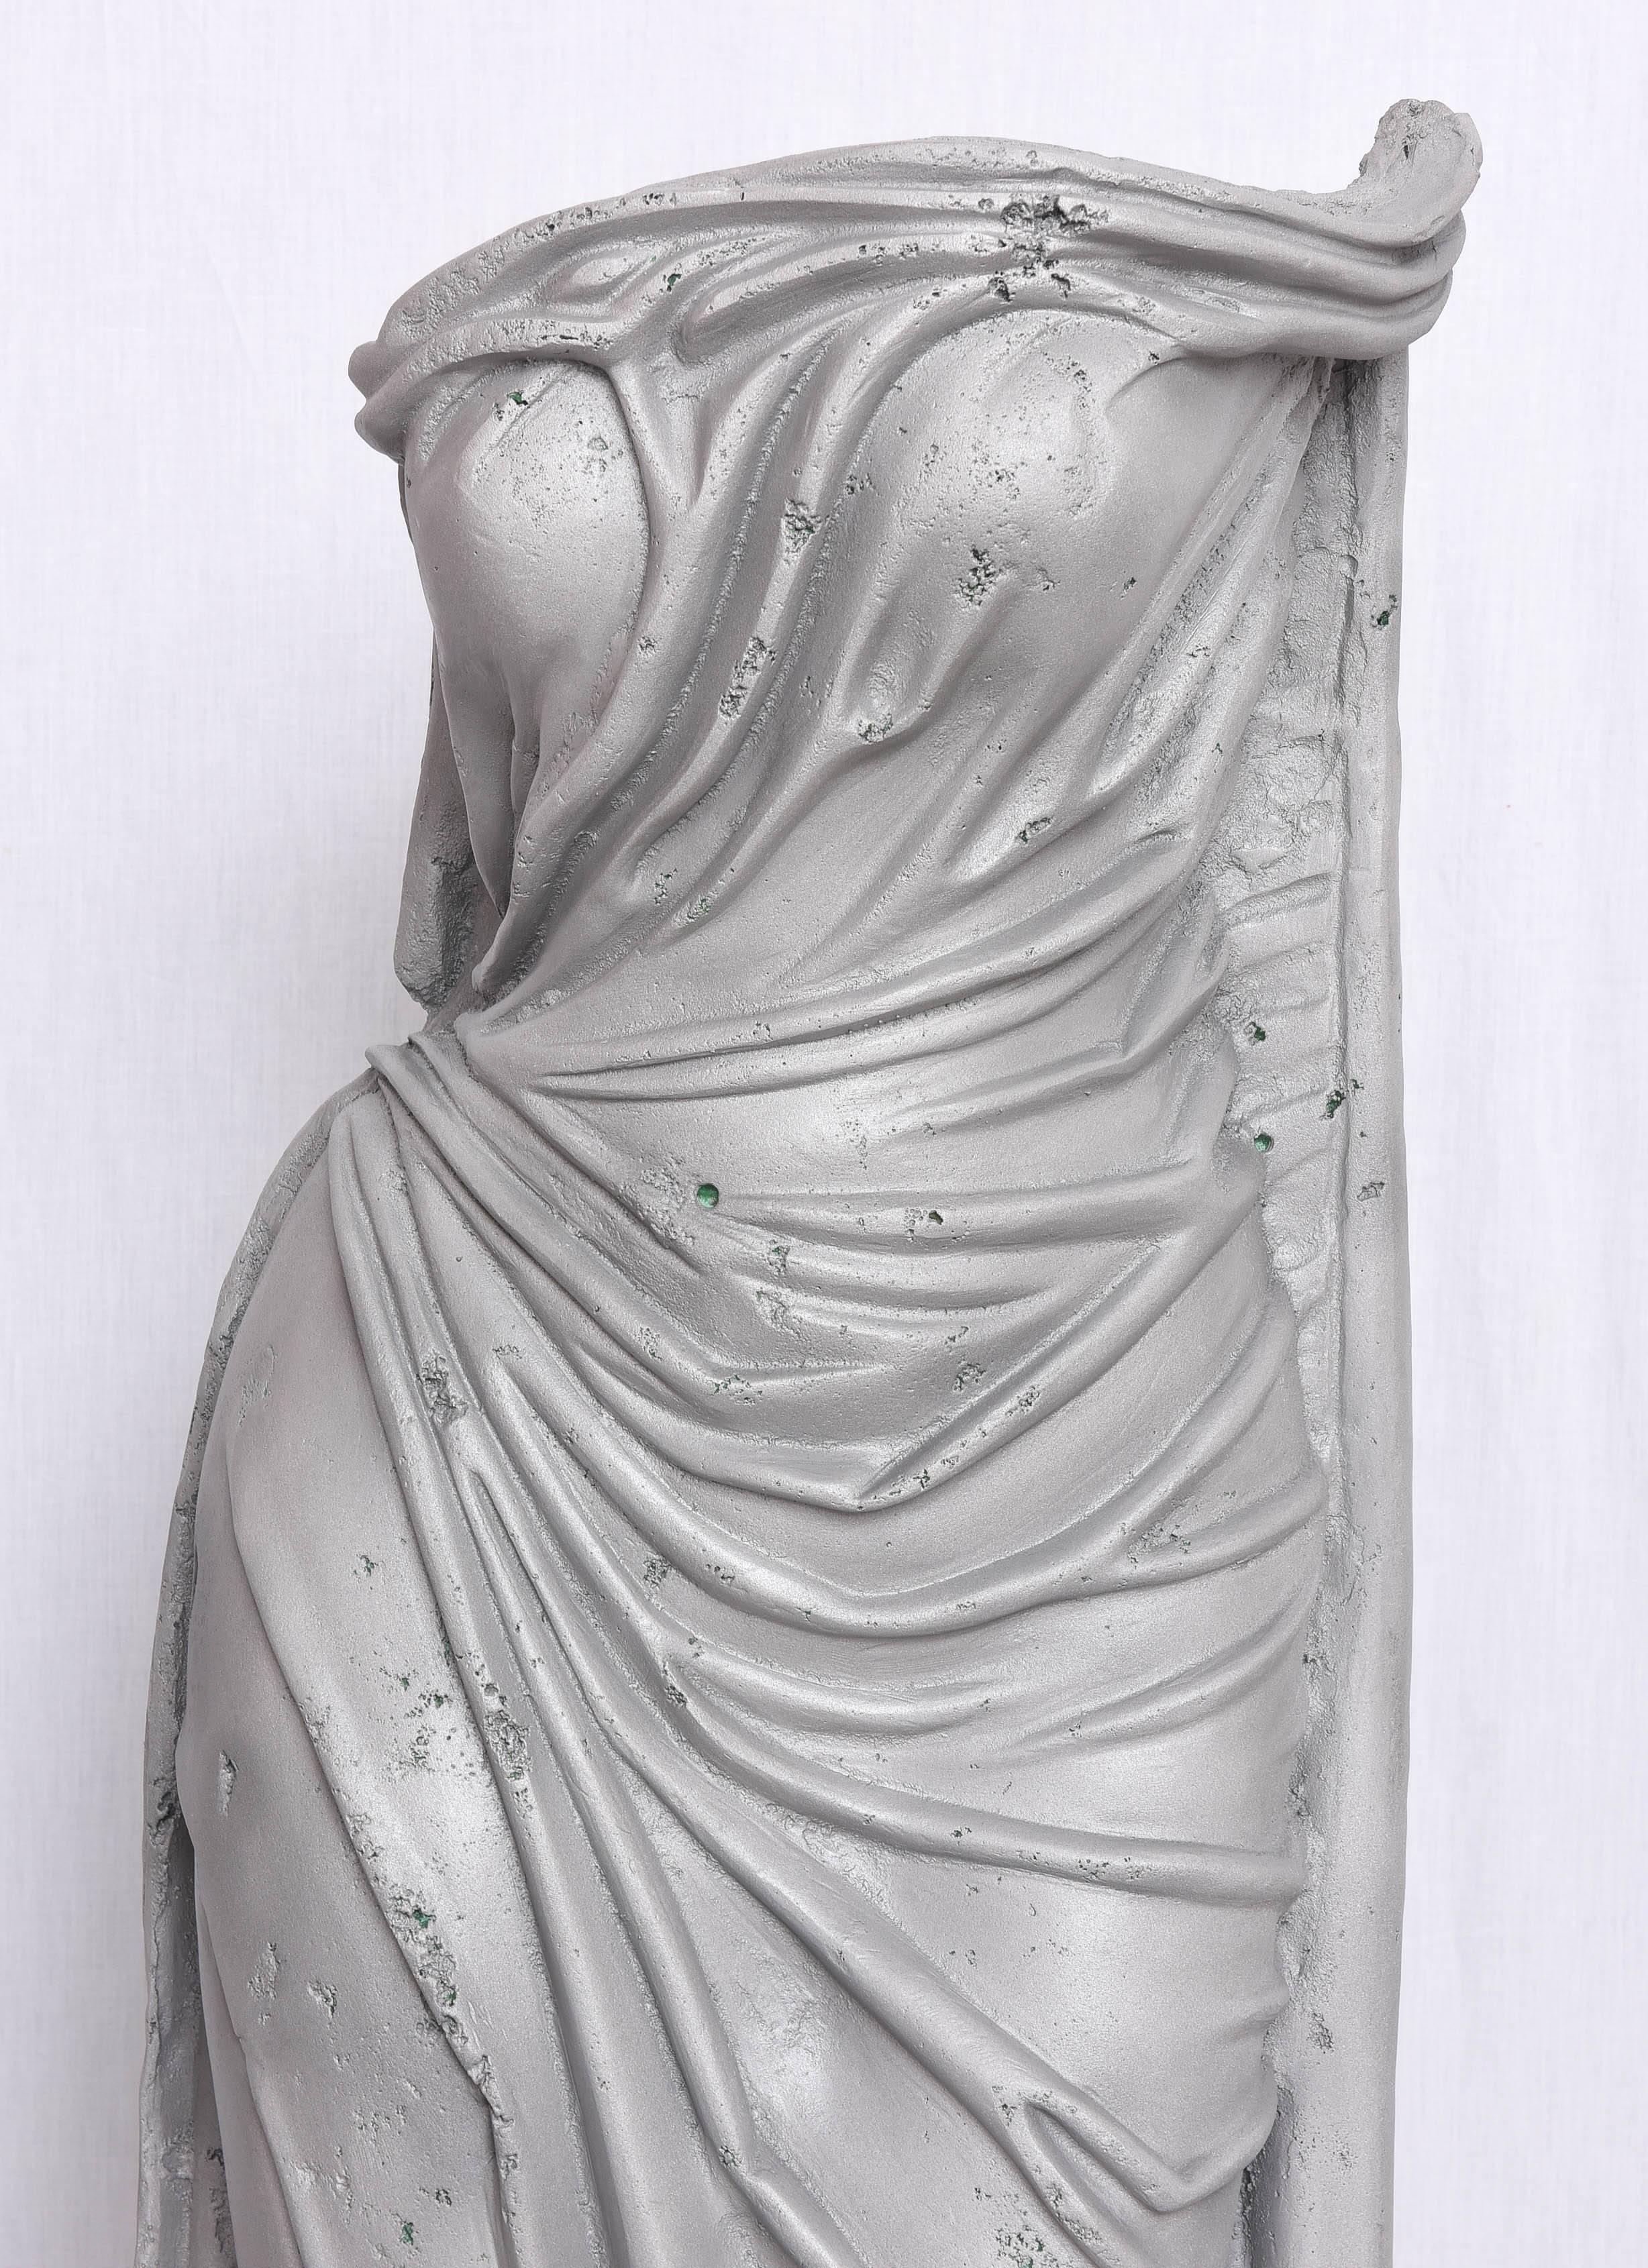 This amazing American Art Deco sculpture was created in the 1930s-1940s and captures the spirit of movement and classicism. The piece is in cast aluminum which was quite the modern material to use in a neoclassical stylized sculpture. 

Note: This